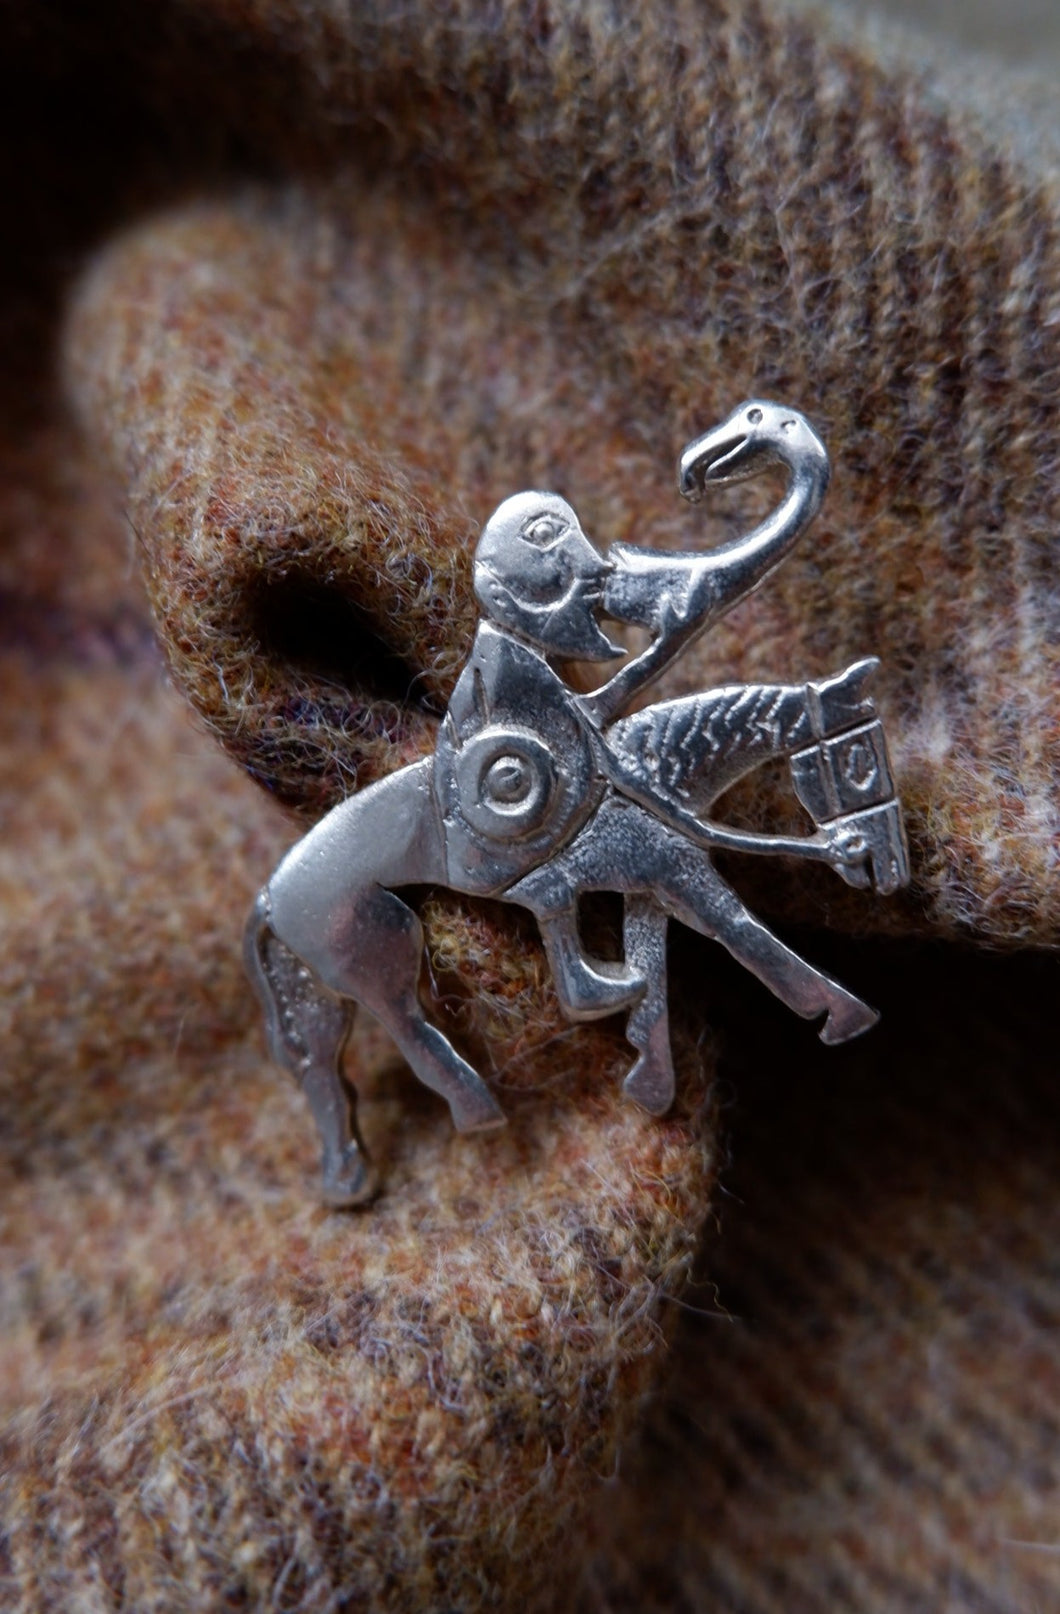 Pictish Man on a Horse Brooch in Sterling Silver - from the Bullion Stone